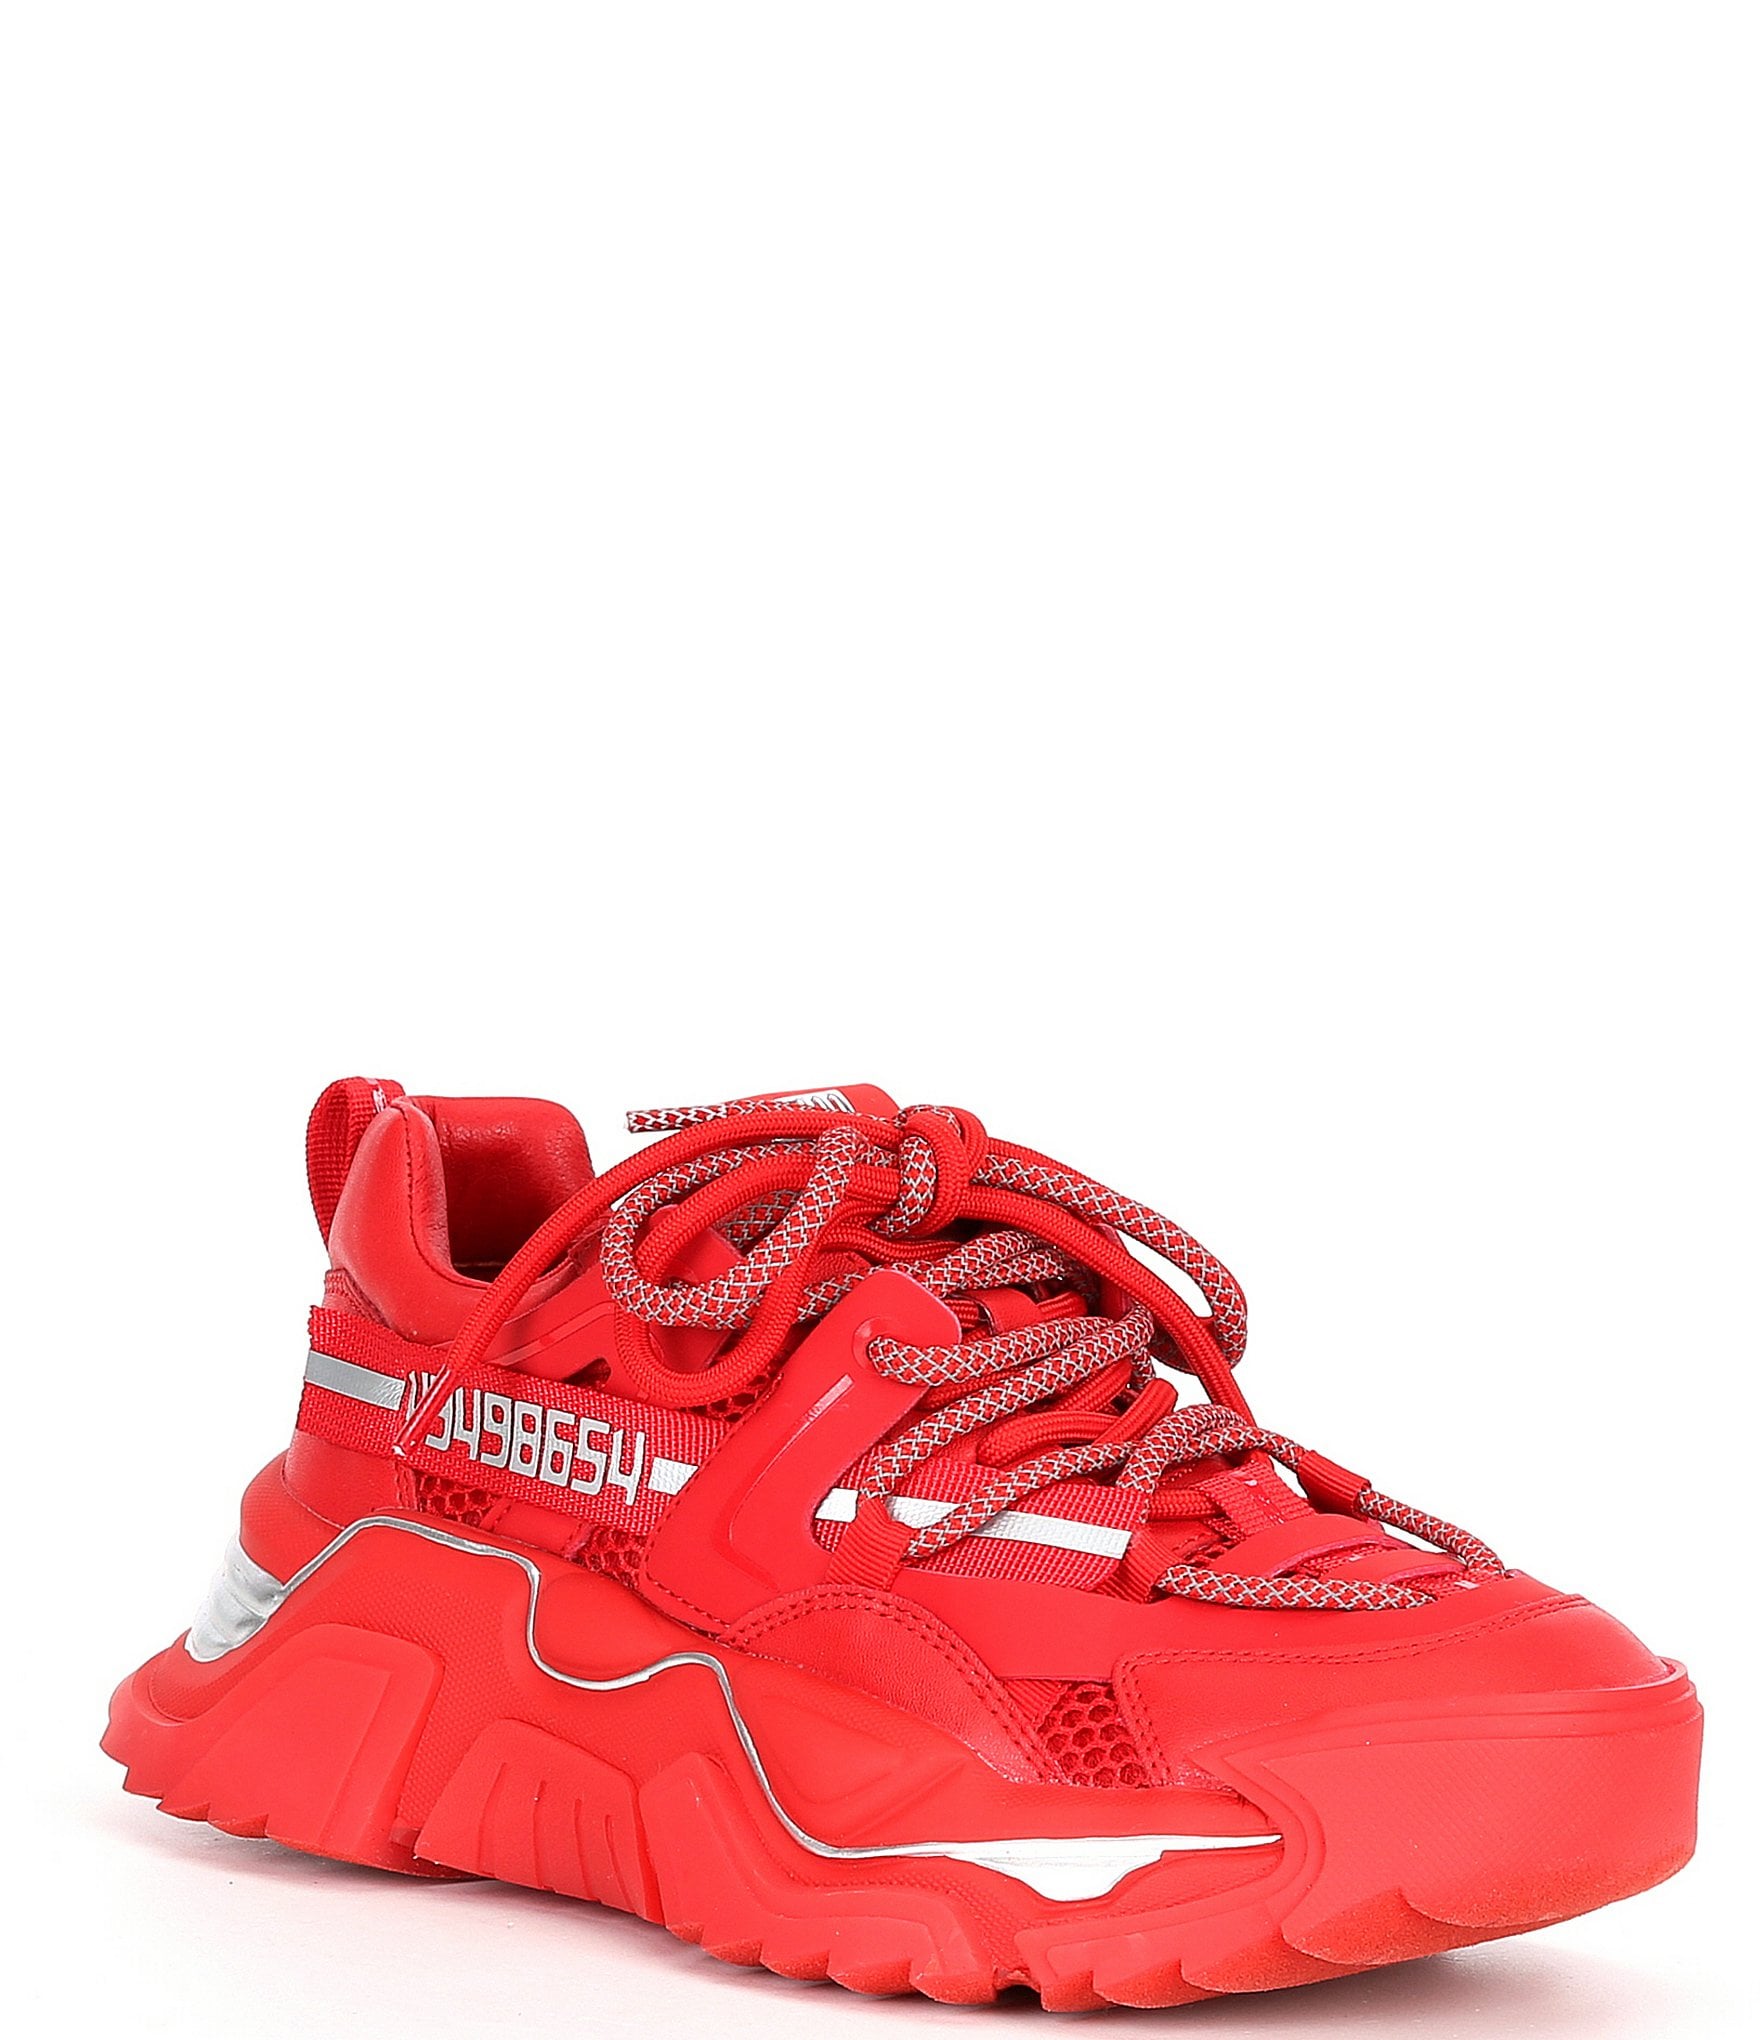 Red Women's Sneakers & Athletic Shoes